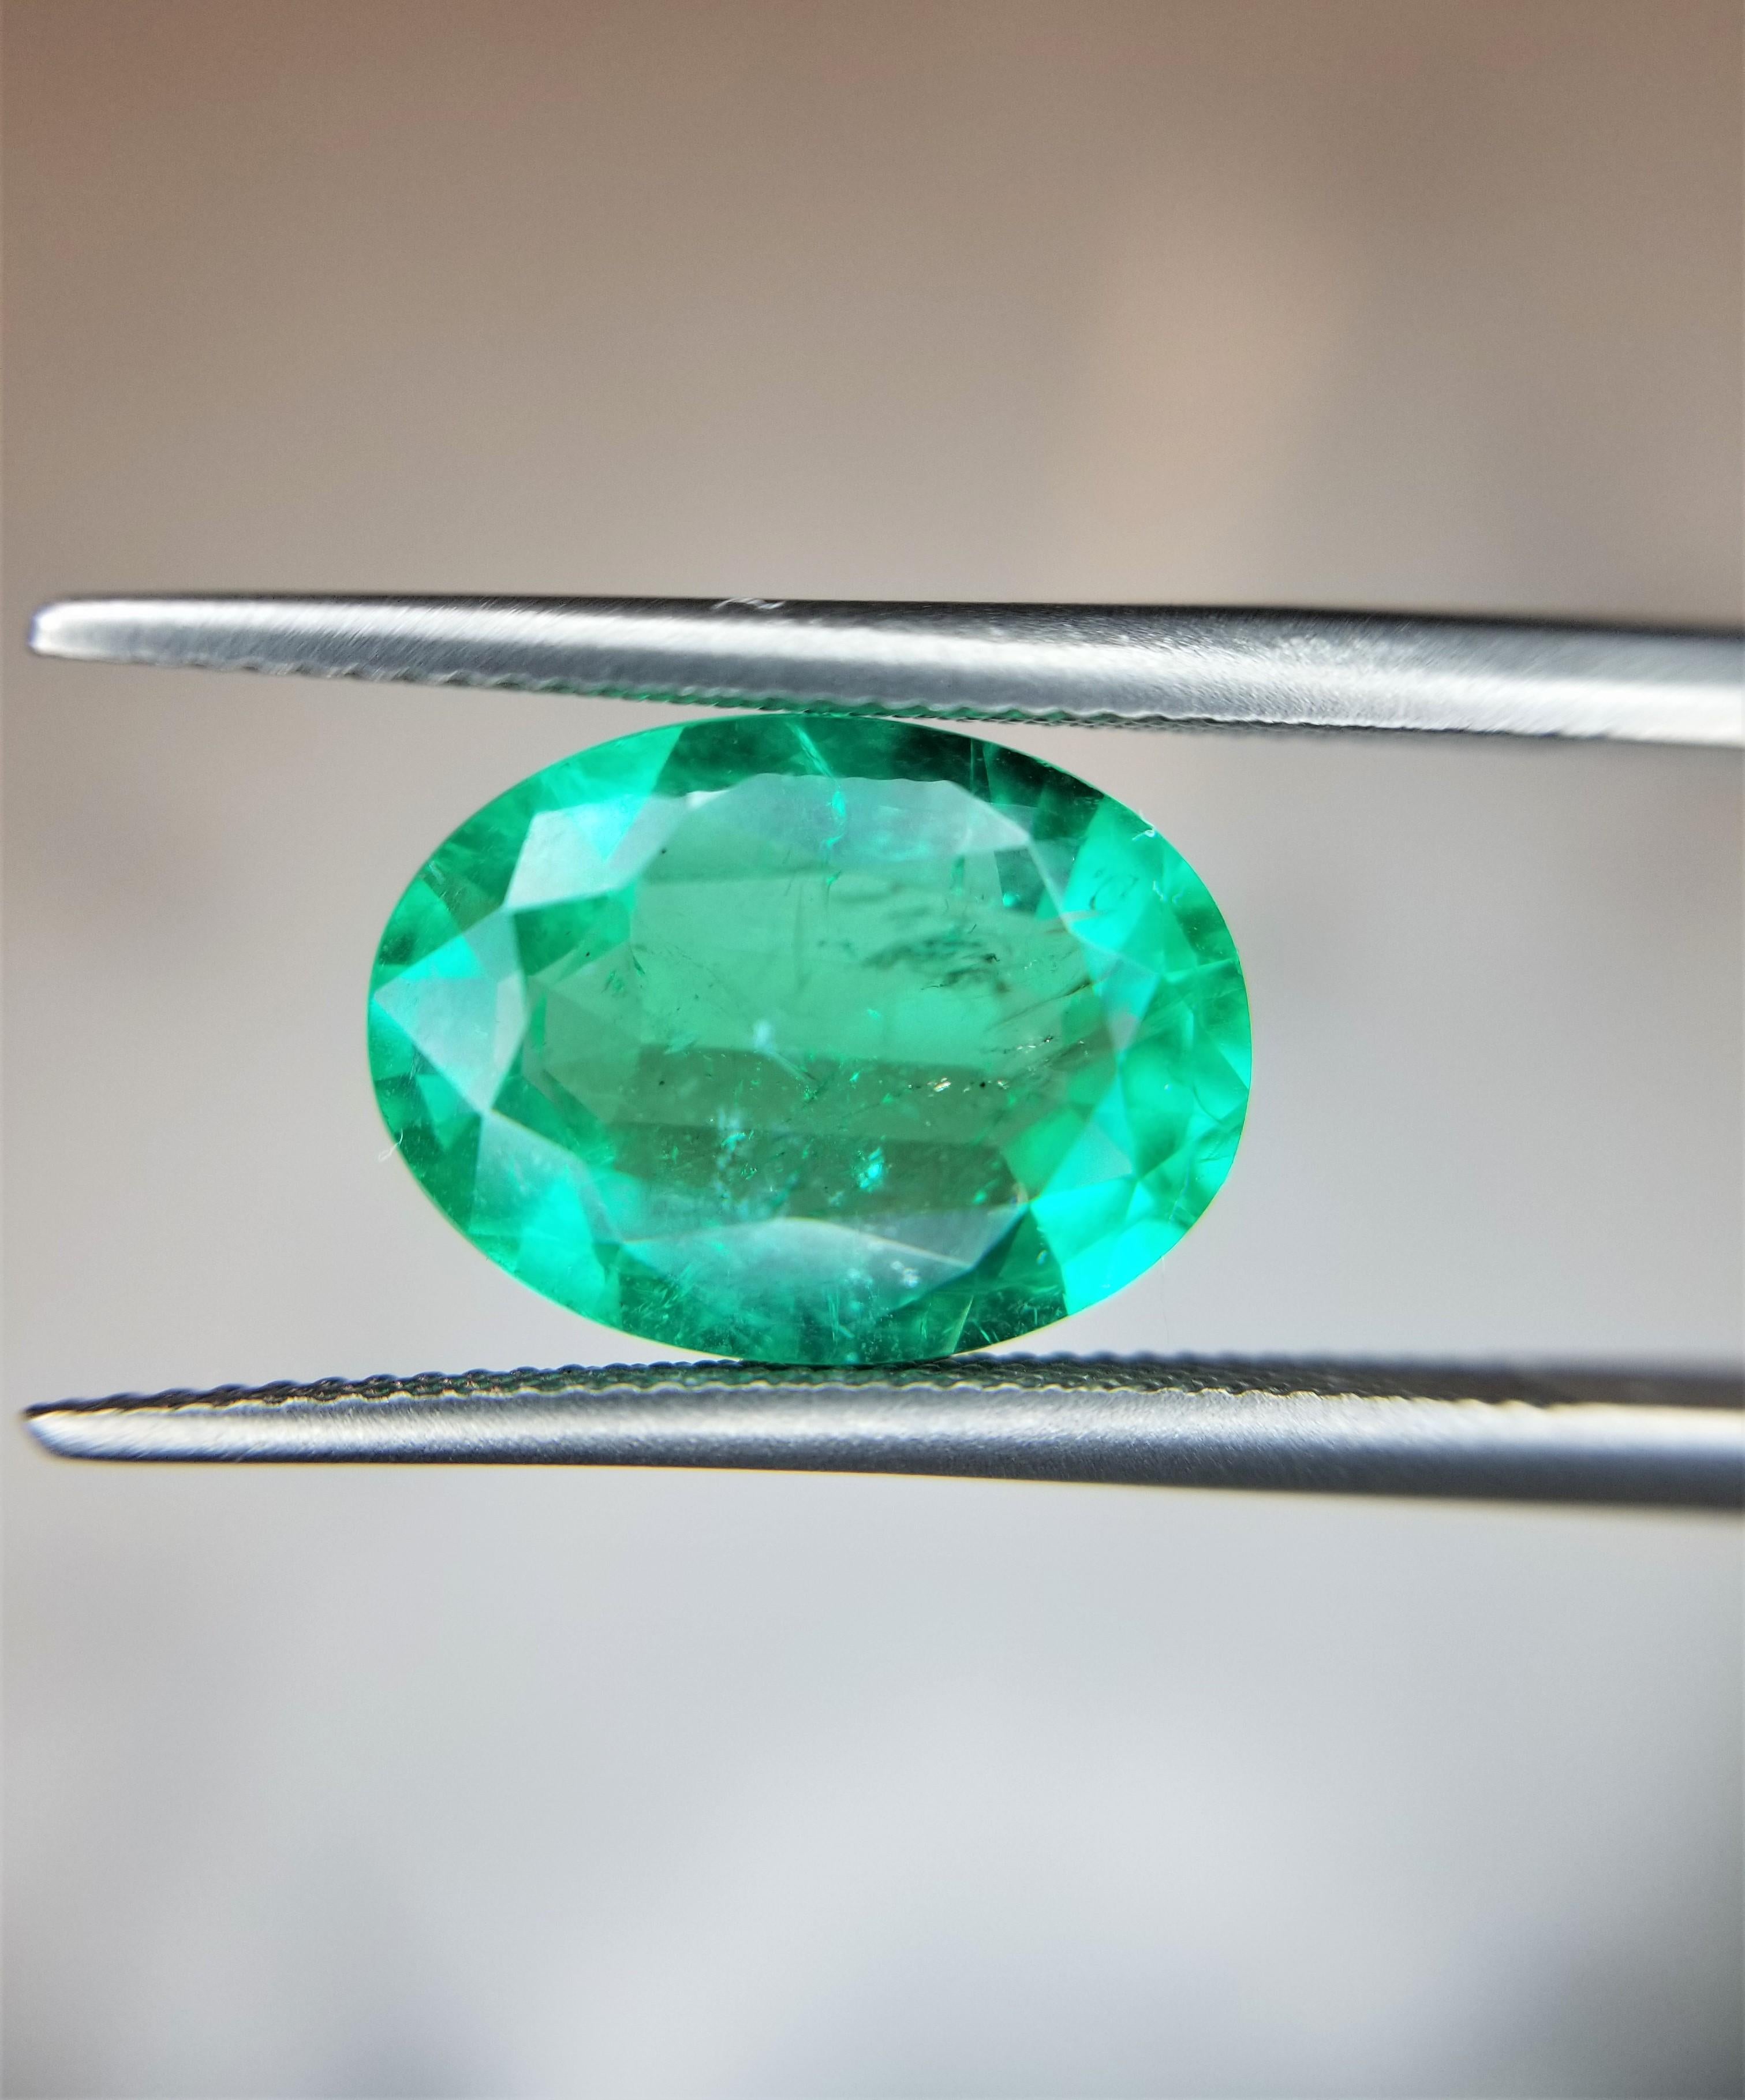 Contemporary 2.92 Ct Weight Oval Shaped Green Color IGITL Certified Emerald Gemstone Pendant For Sale